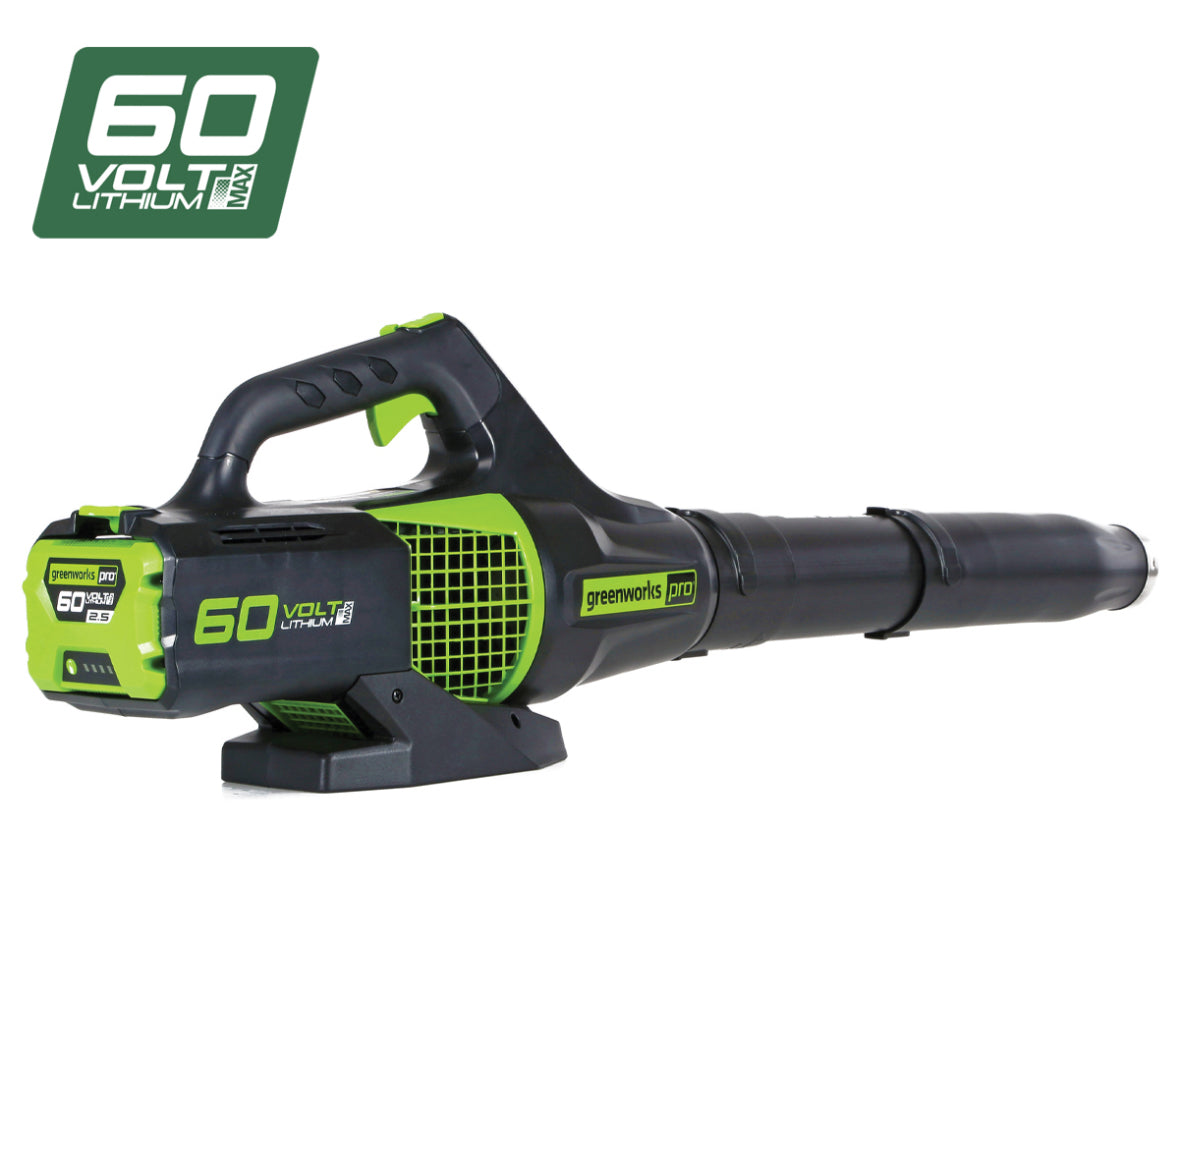 Greenworks 60V 46cm SP Mower + Blower + Multi Tool + Pole Saw/Hedge Trimmer attach 1×4.0Ah Battery + Charger Kit